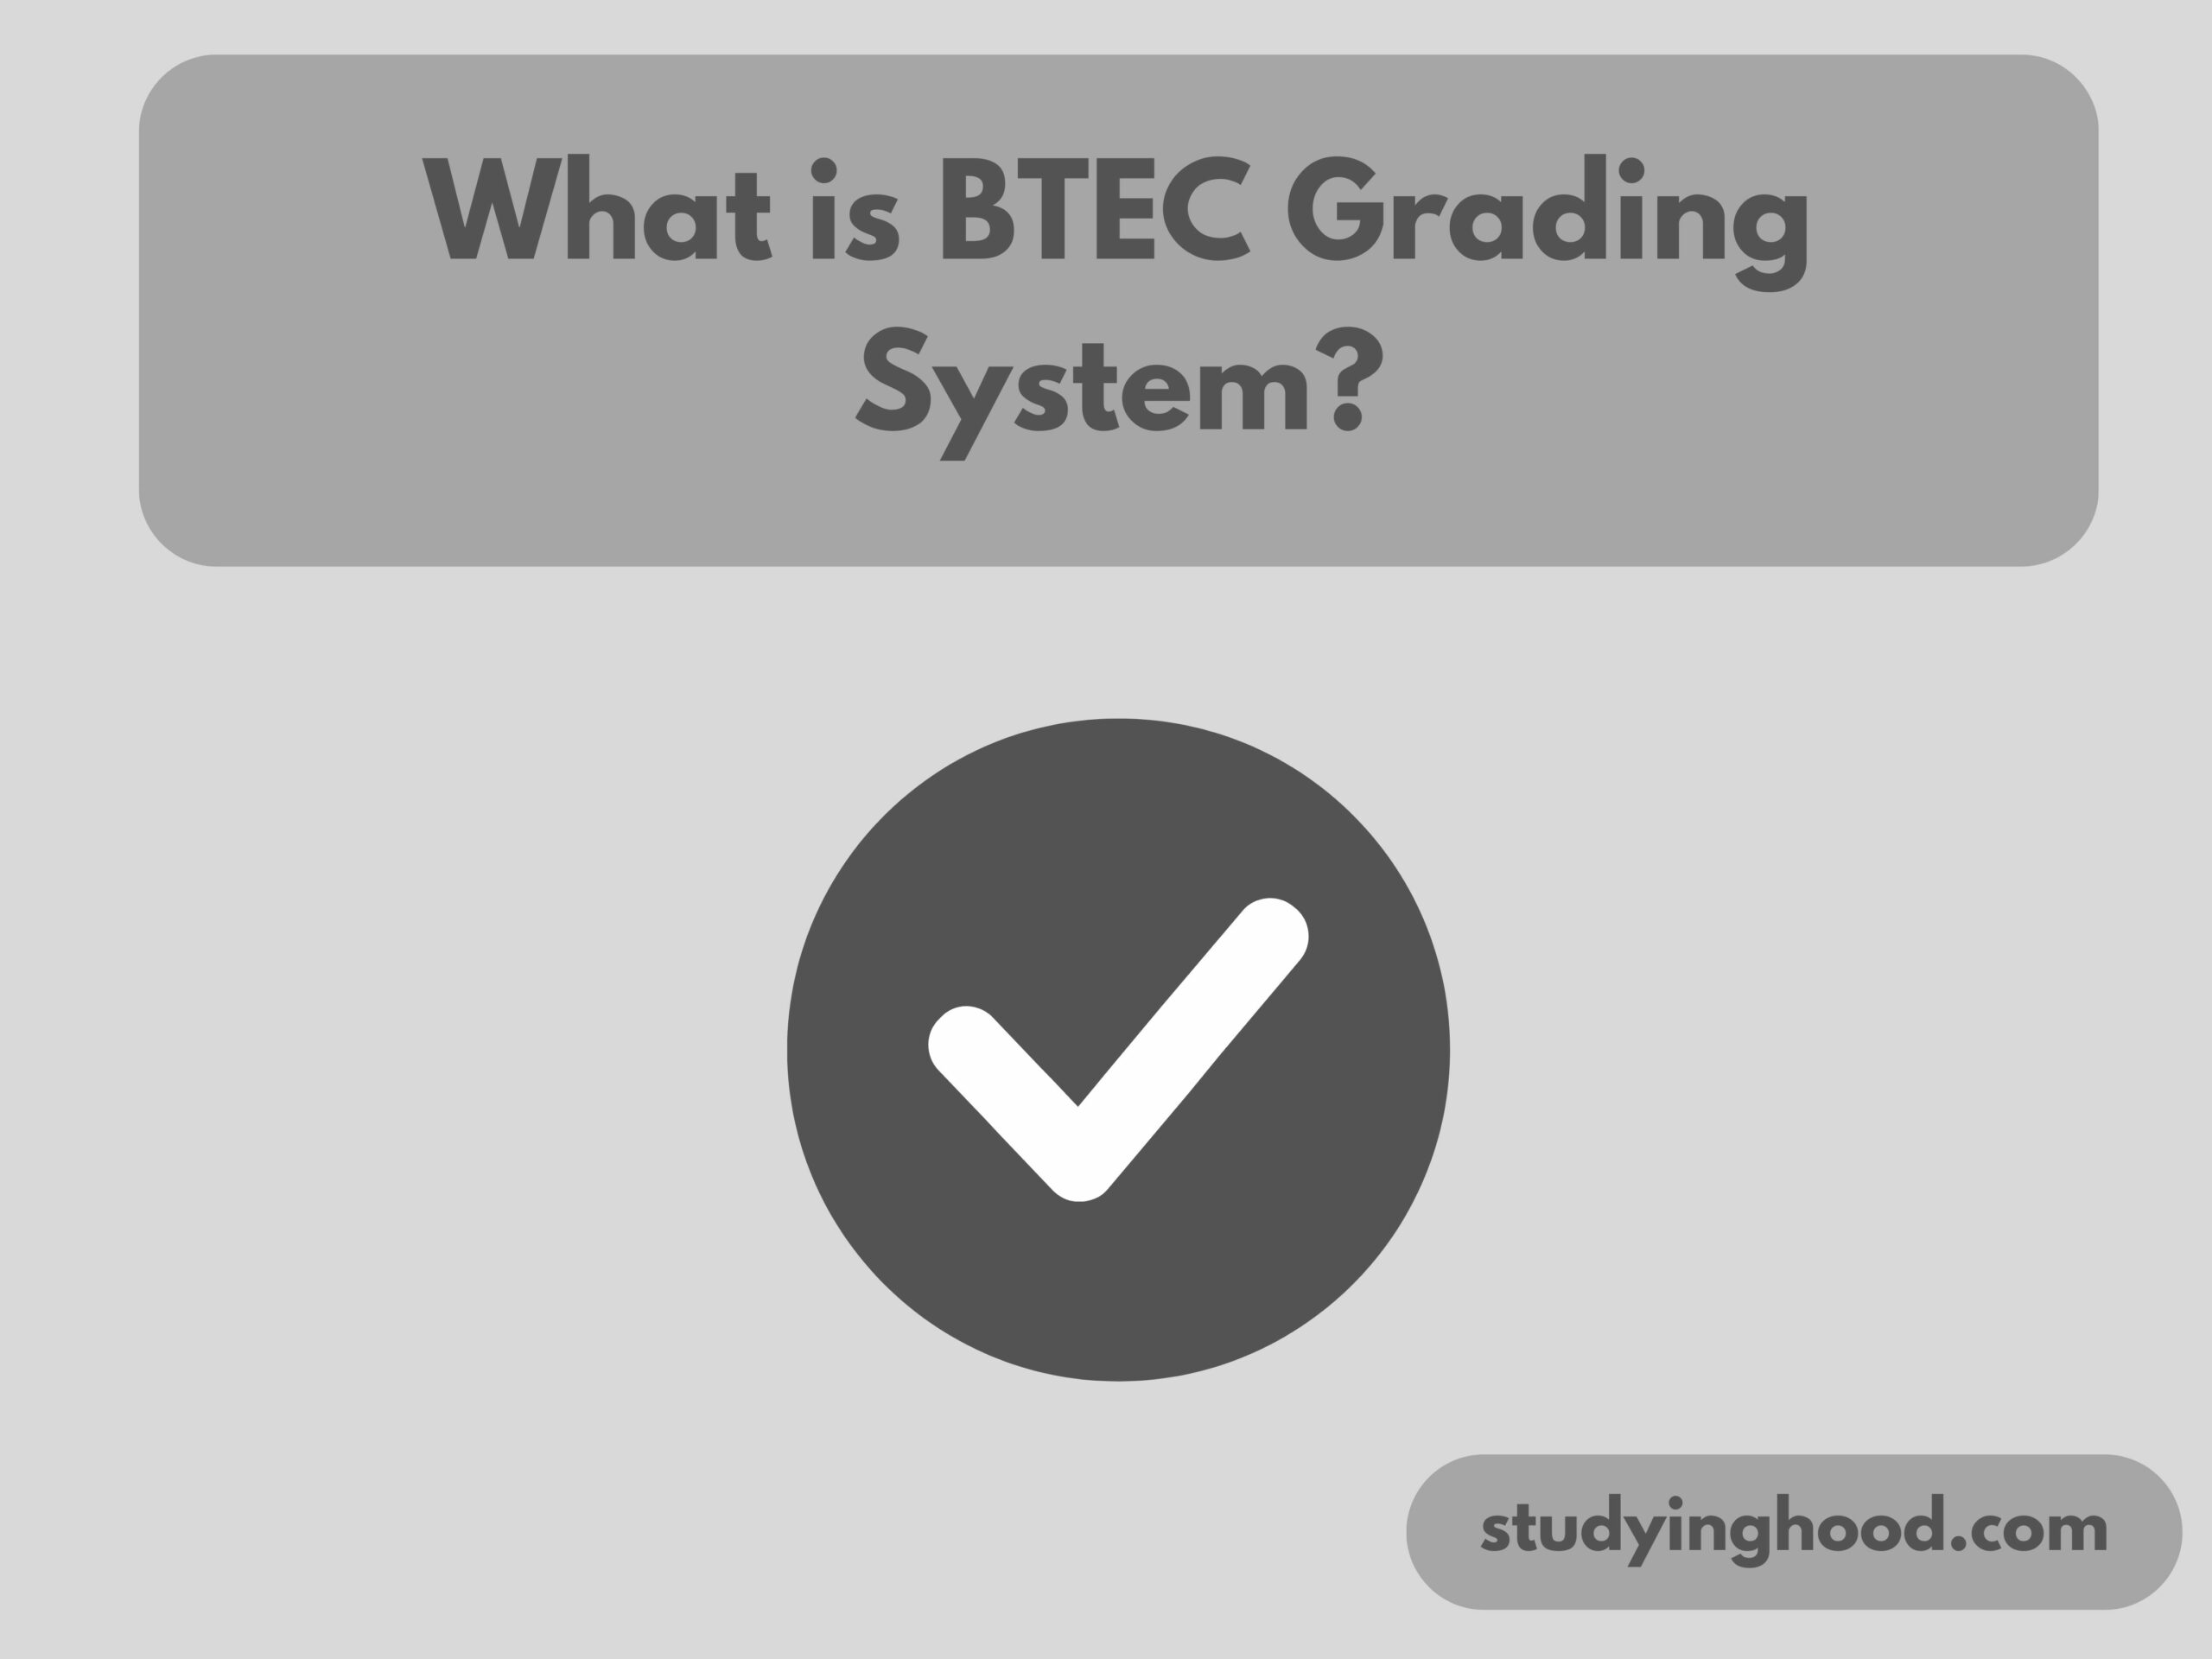 What is BTEC Grading System